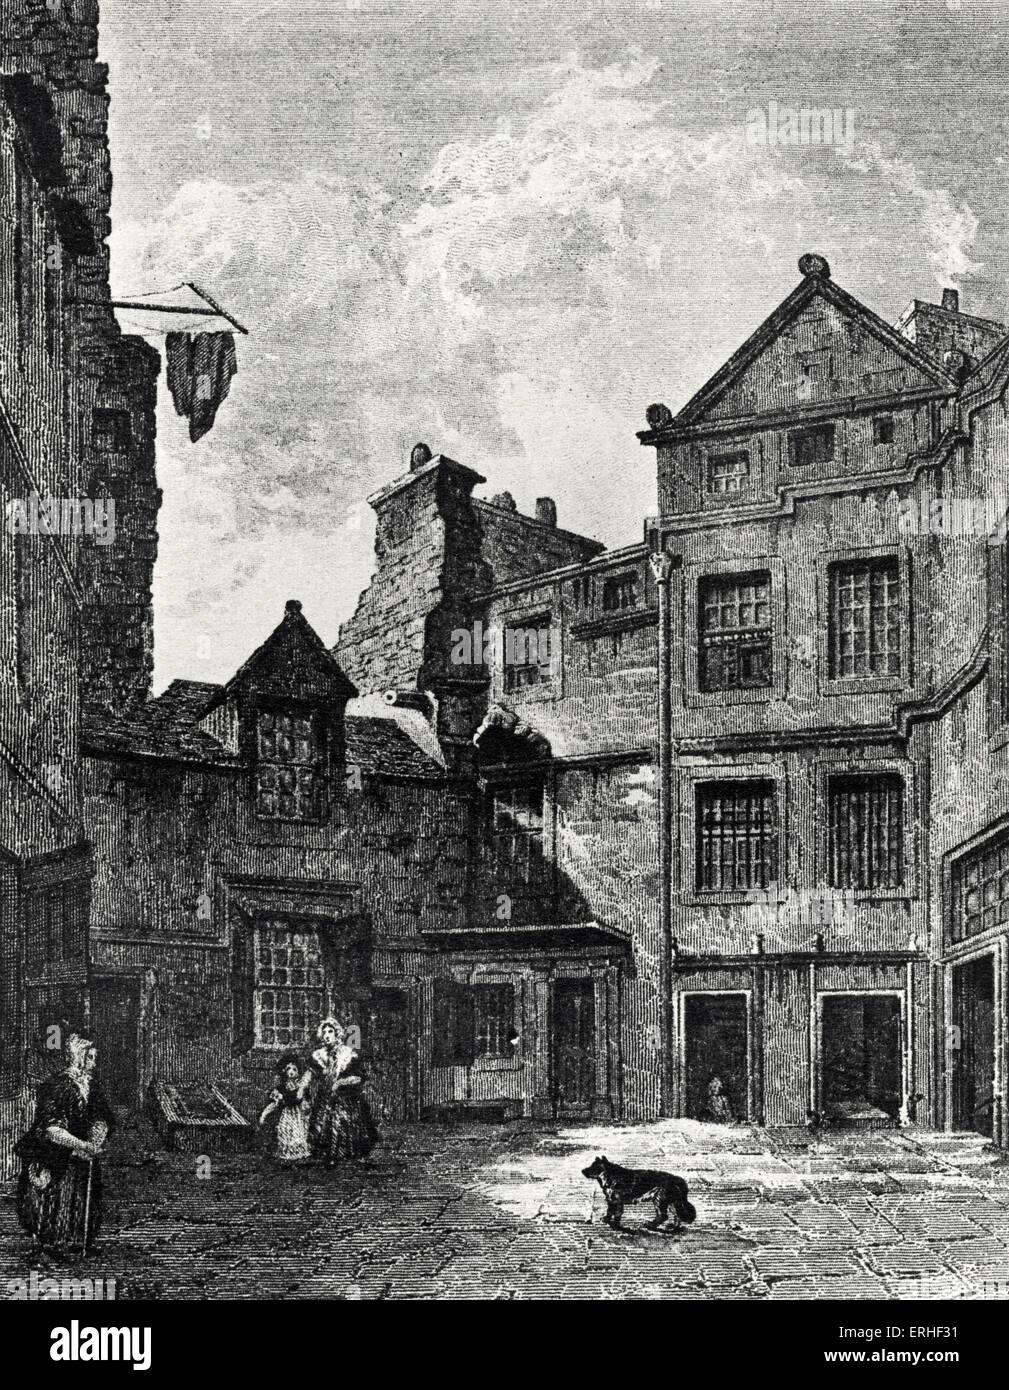 David Hume - Riddle's Close, Edinburgh, where the Scottish philosopher, economist and historian lived for a while. 26 April 1711 - 25 August 1776. Engraving ' Edinburgh in the Olden Times ' (1848) by Daniel Wilson Stock Photo